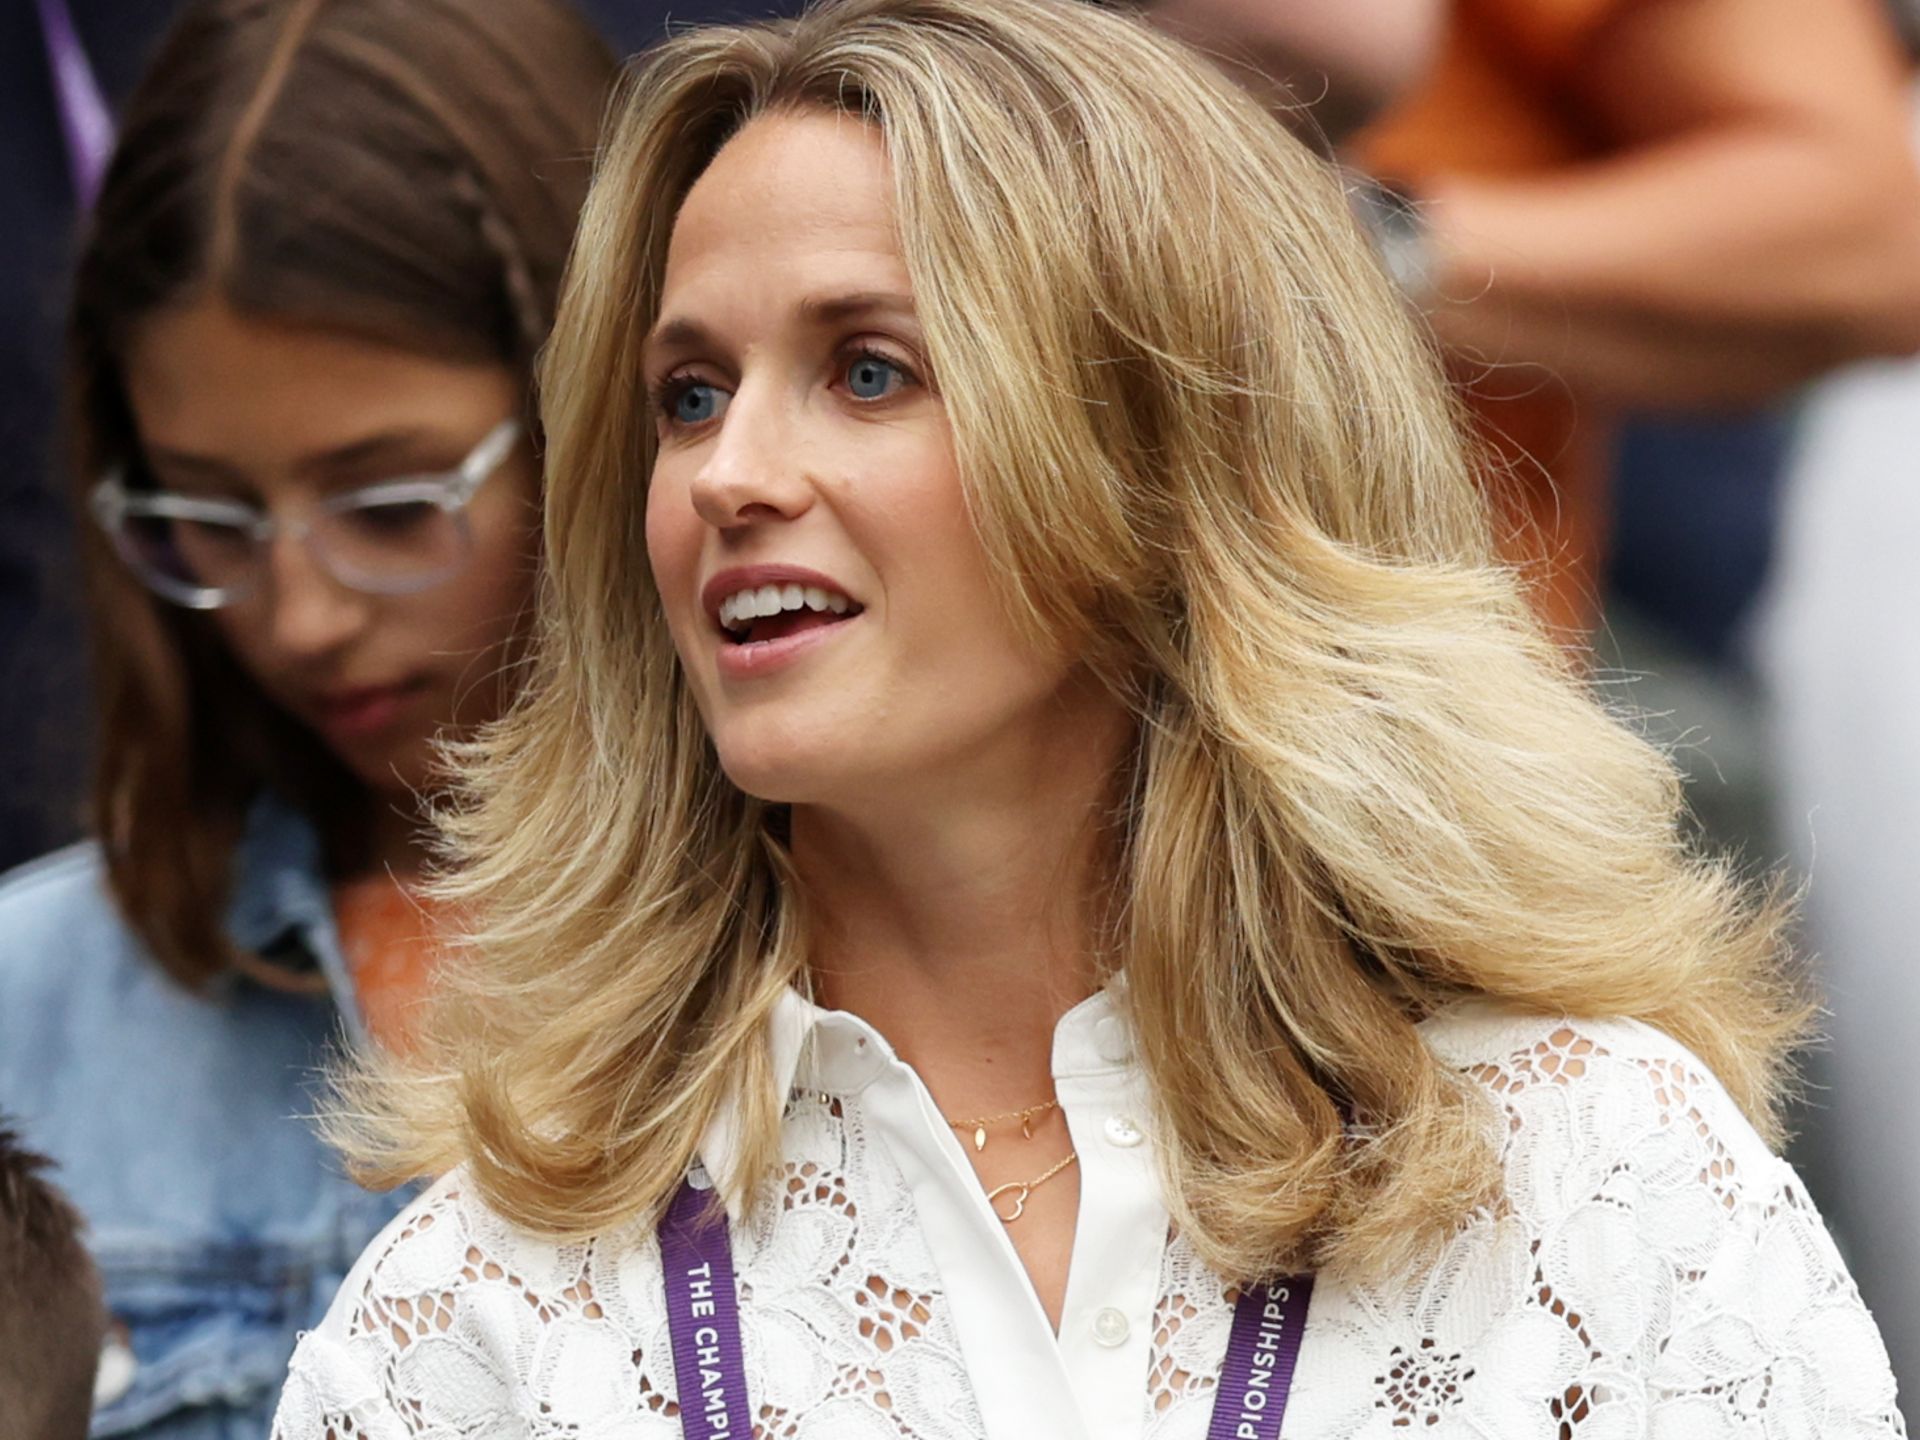 Andy Murray's wife Kim Sears can't hide her disappointment as he crashes  out of Wimbledon